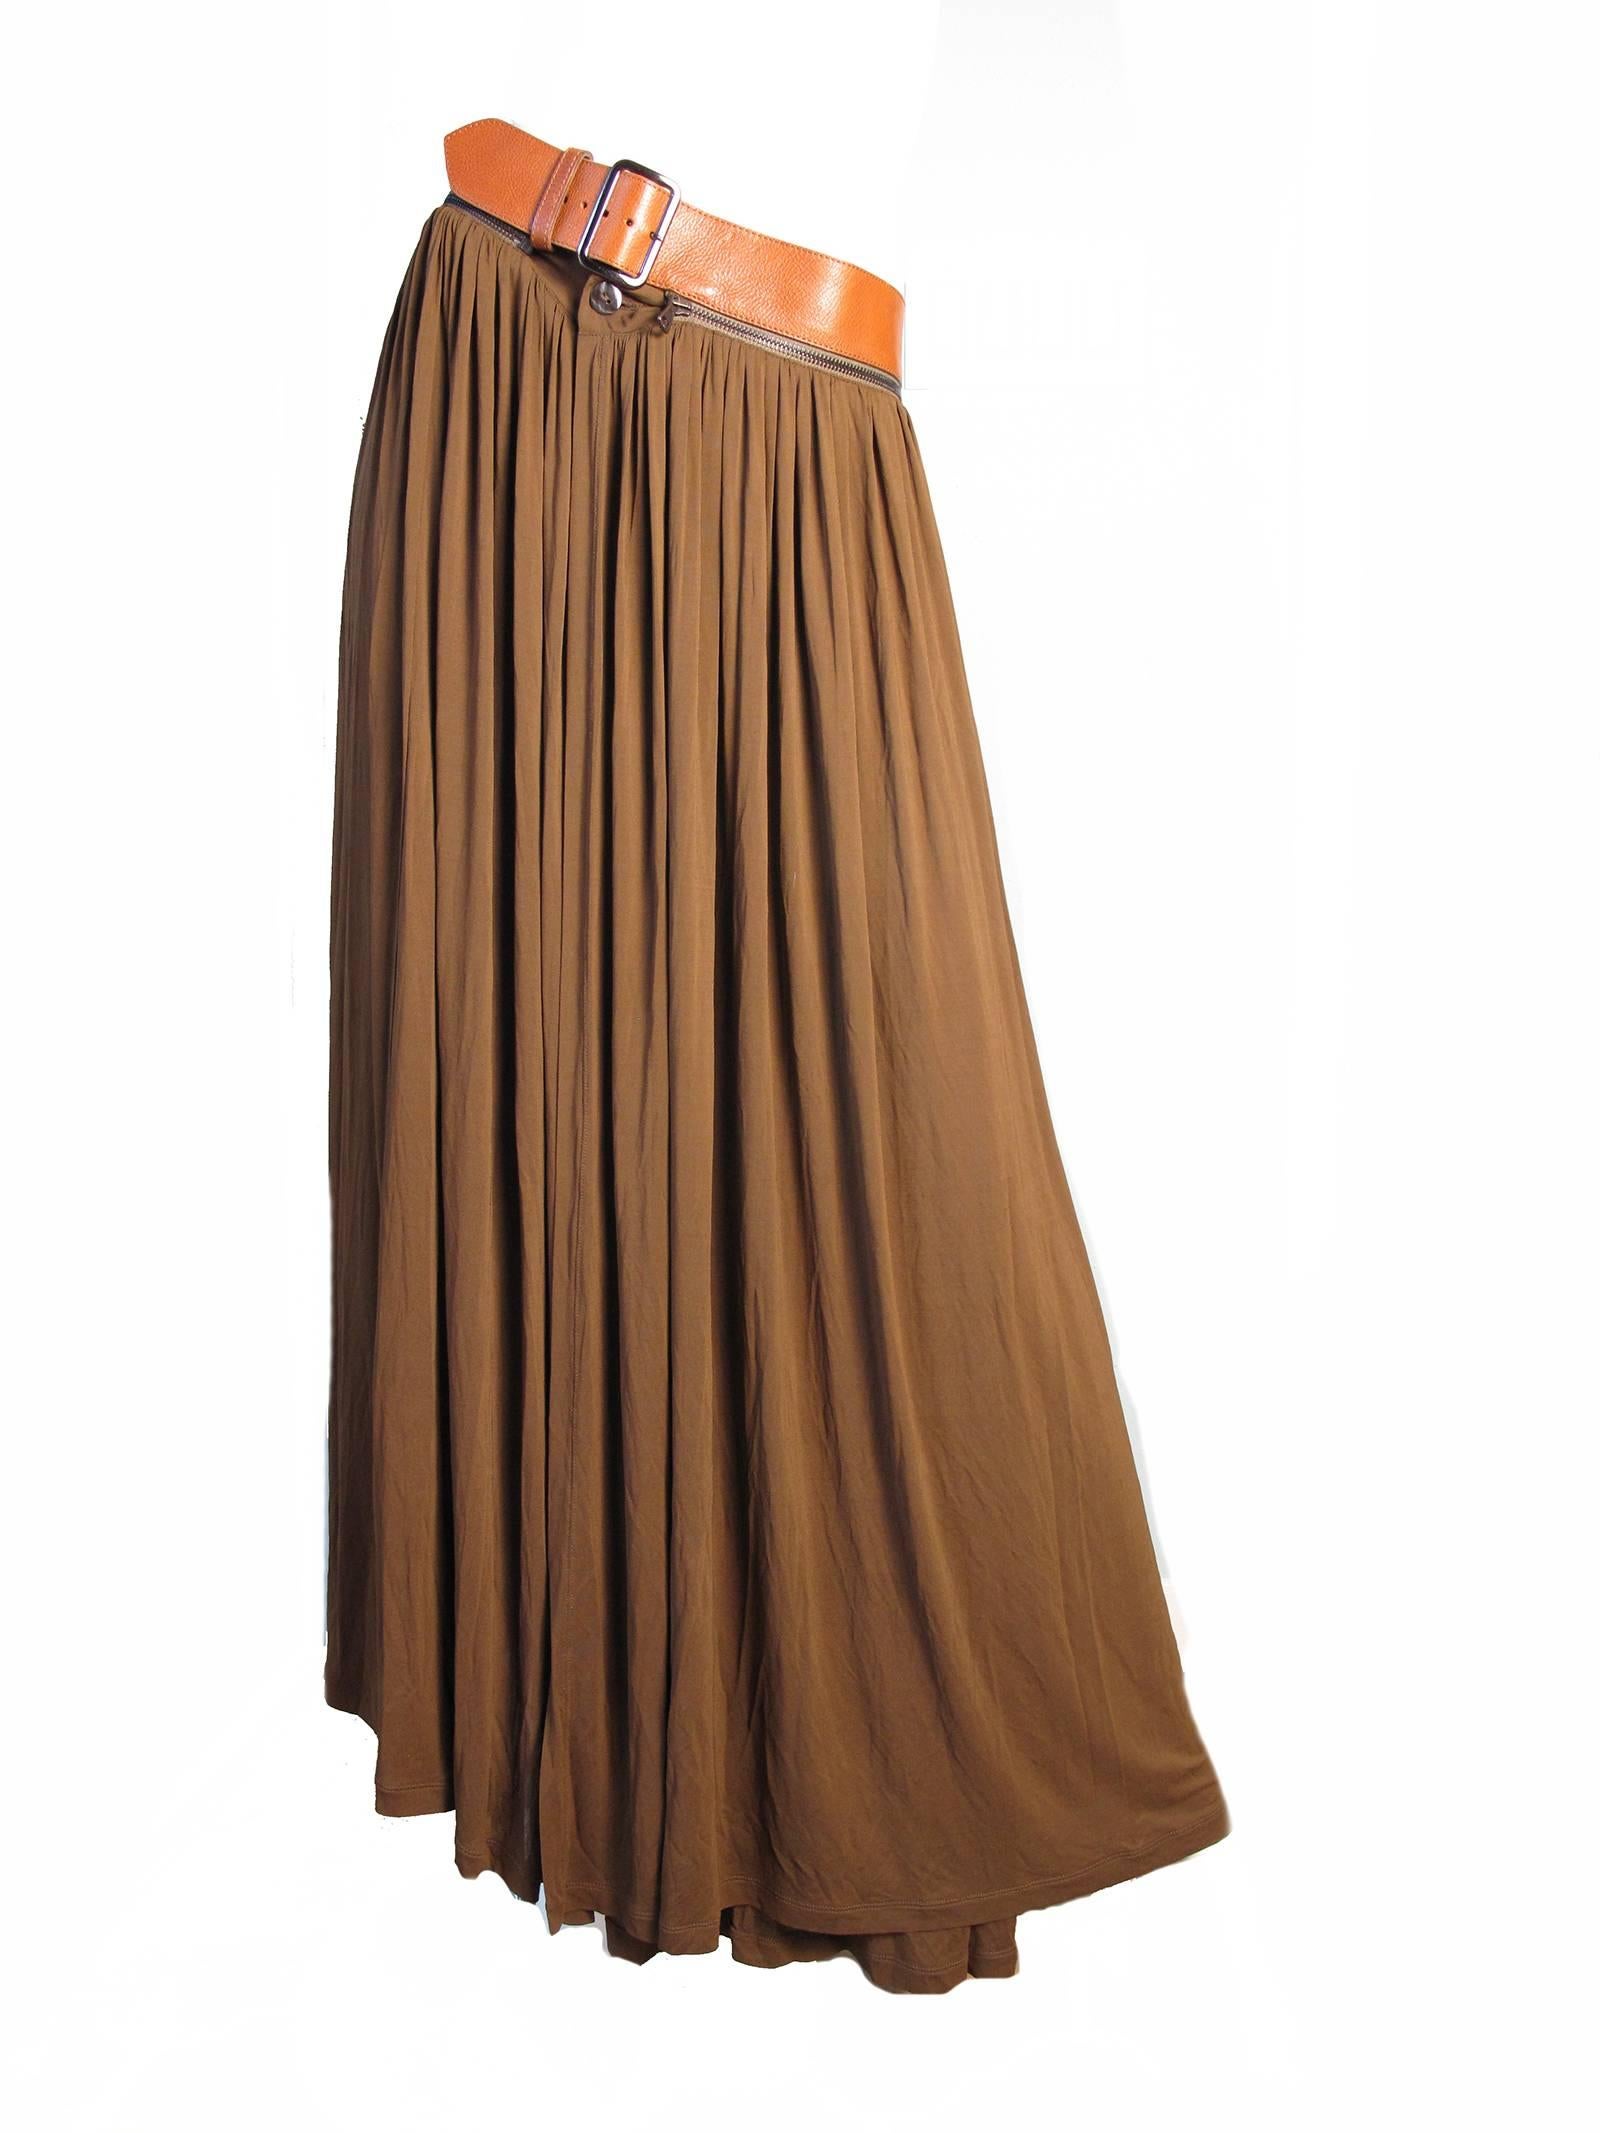 Brown 1990s Gaultier Silk Skirt with Leather Removable Belt